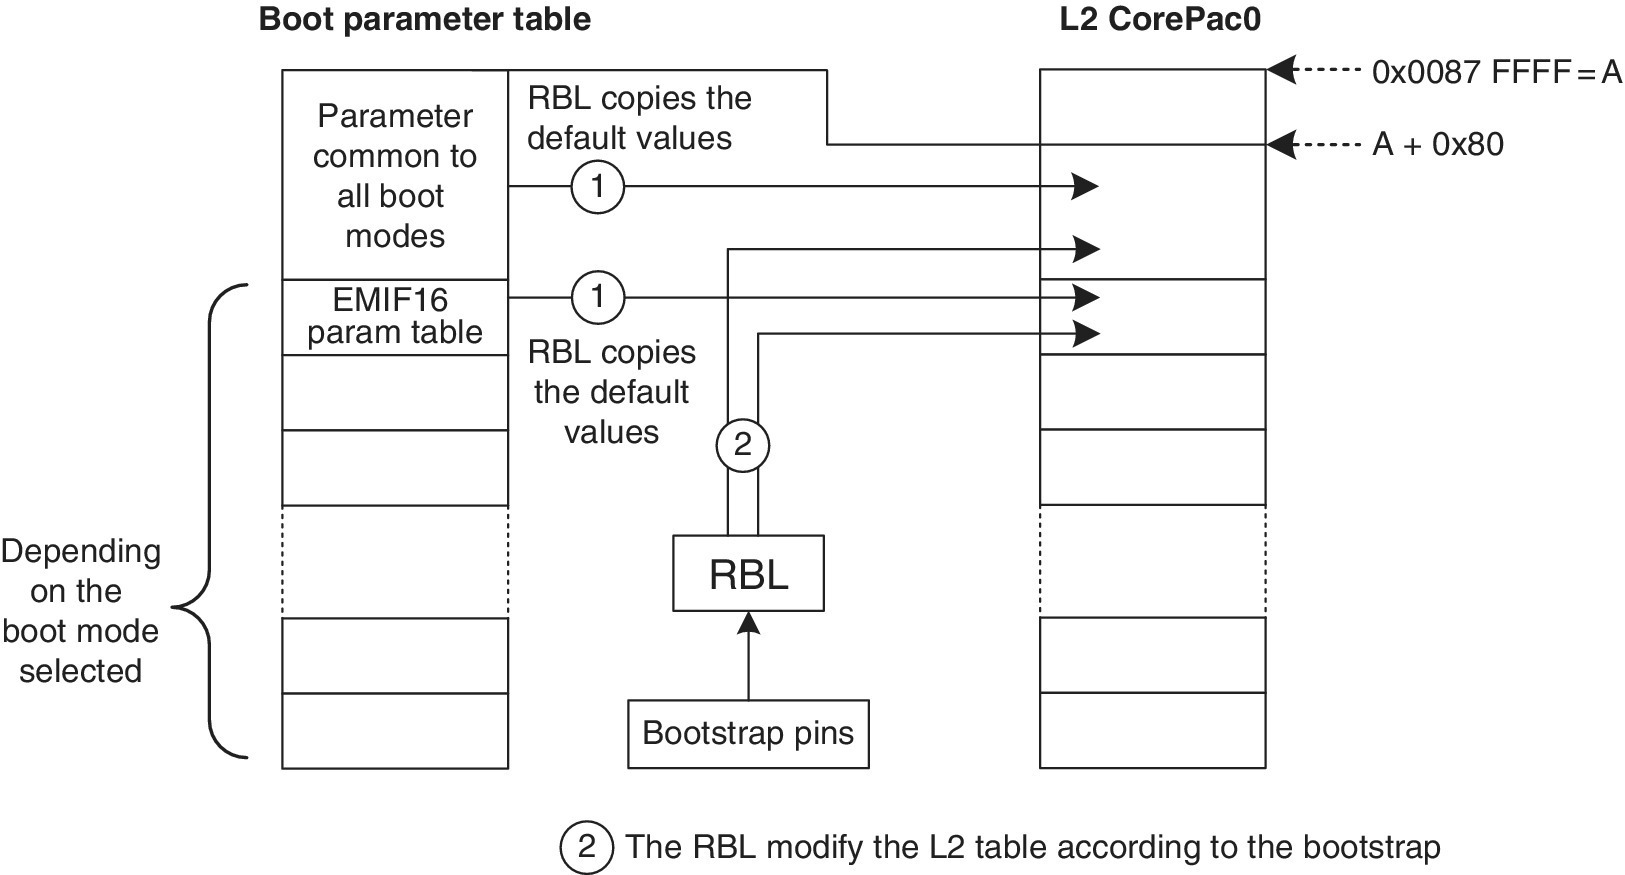 Schematic illustration of the RBL boot process illustrating 3 arrows pointing from parameter common to all boot modes; EMIF 16 param table; and RBL to boxes for L2 CorePack0.